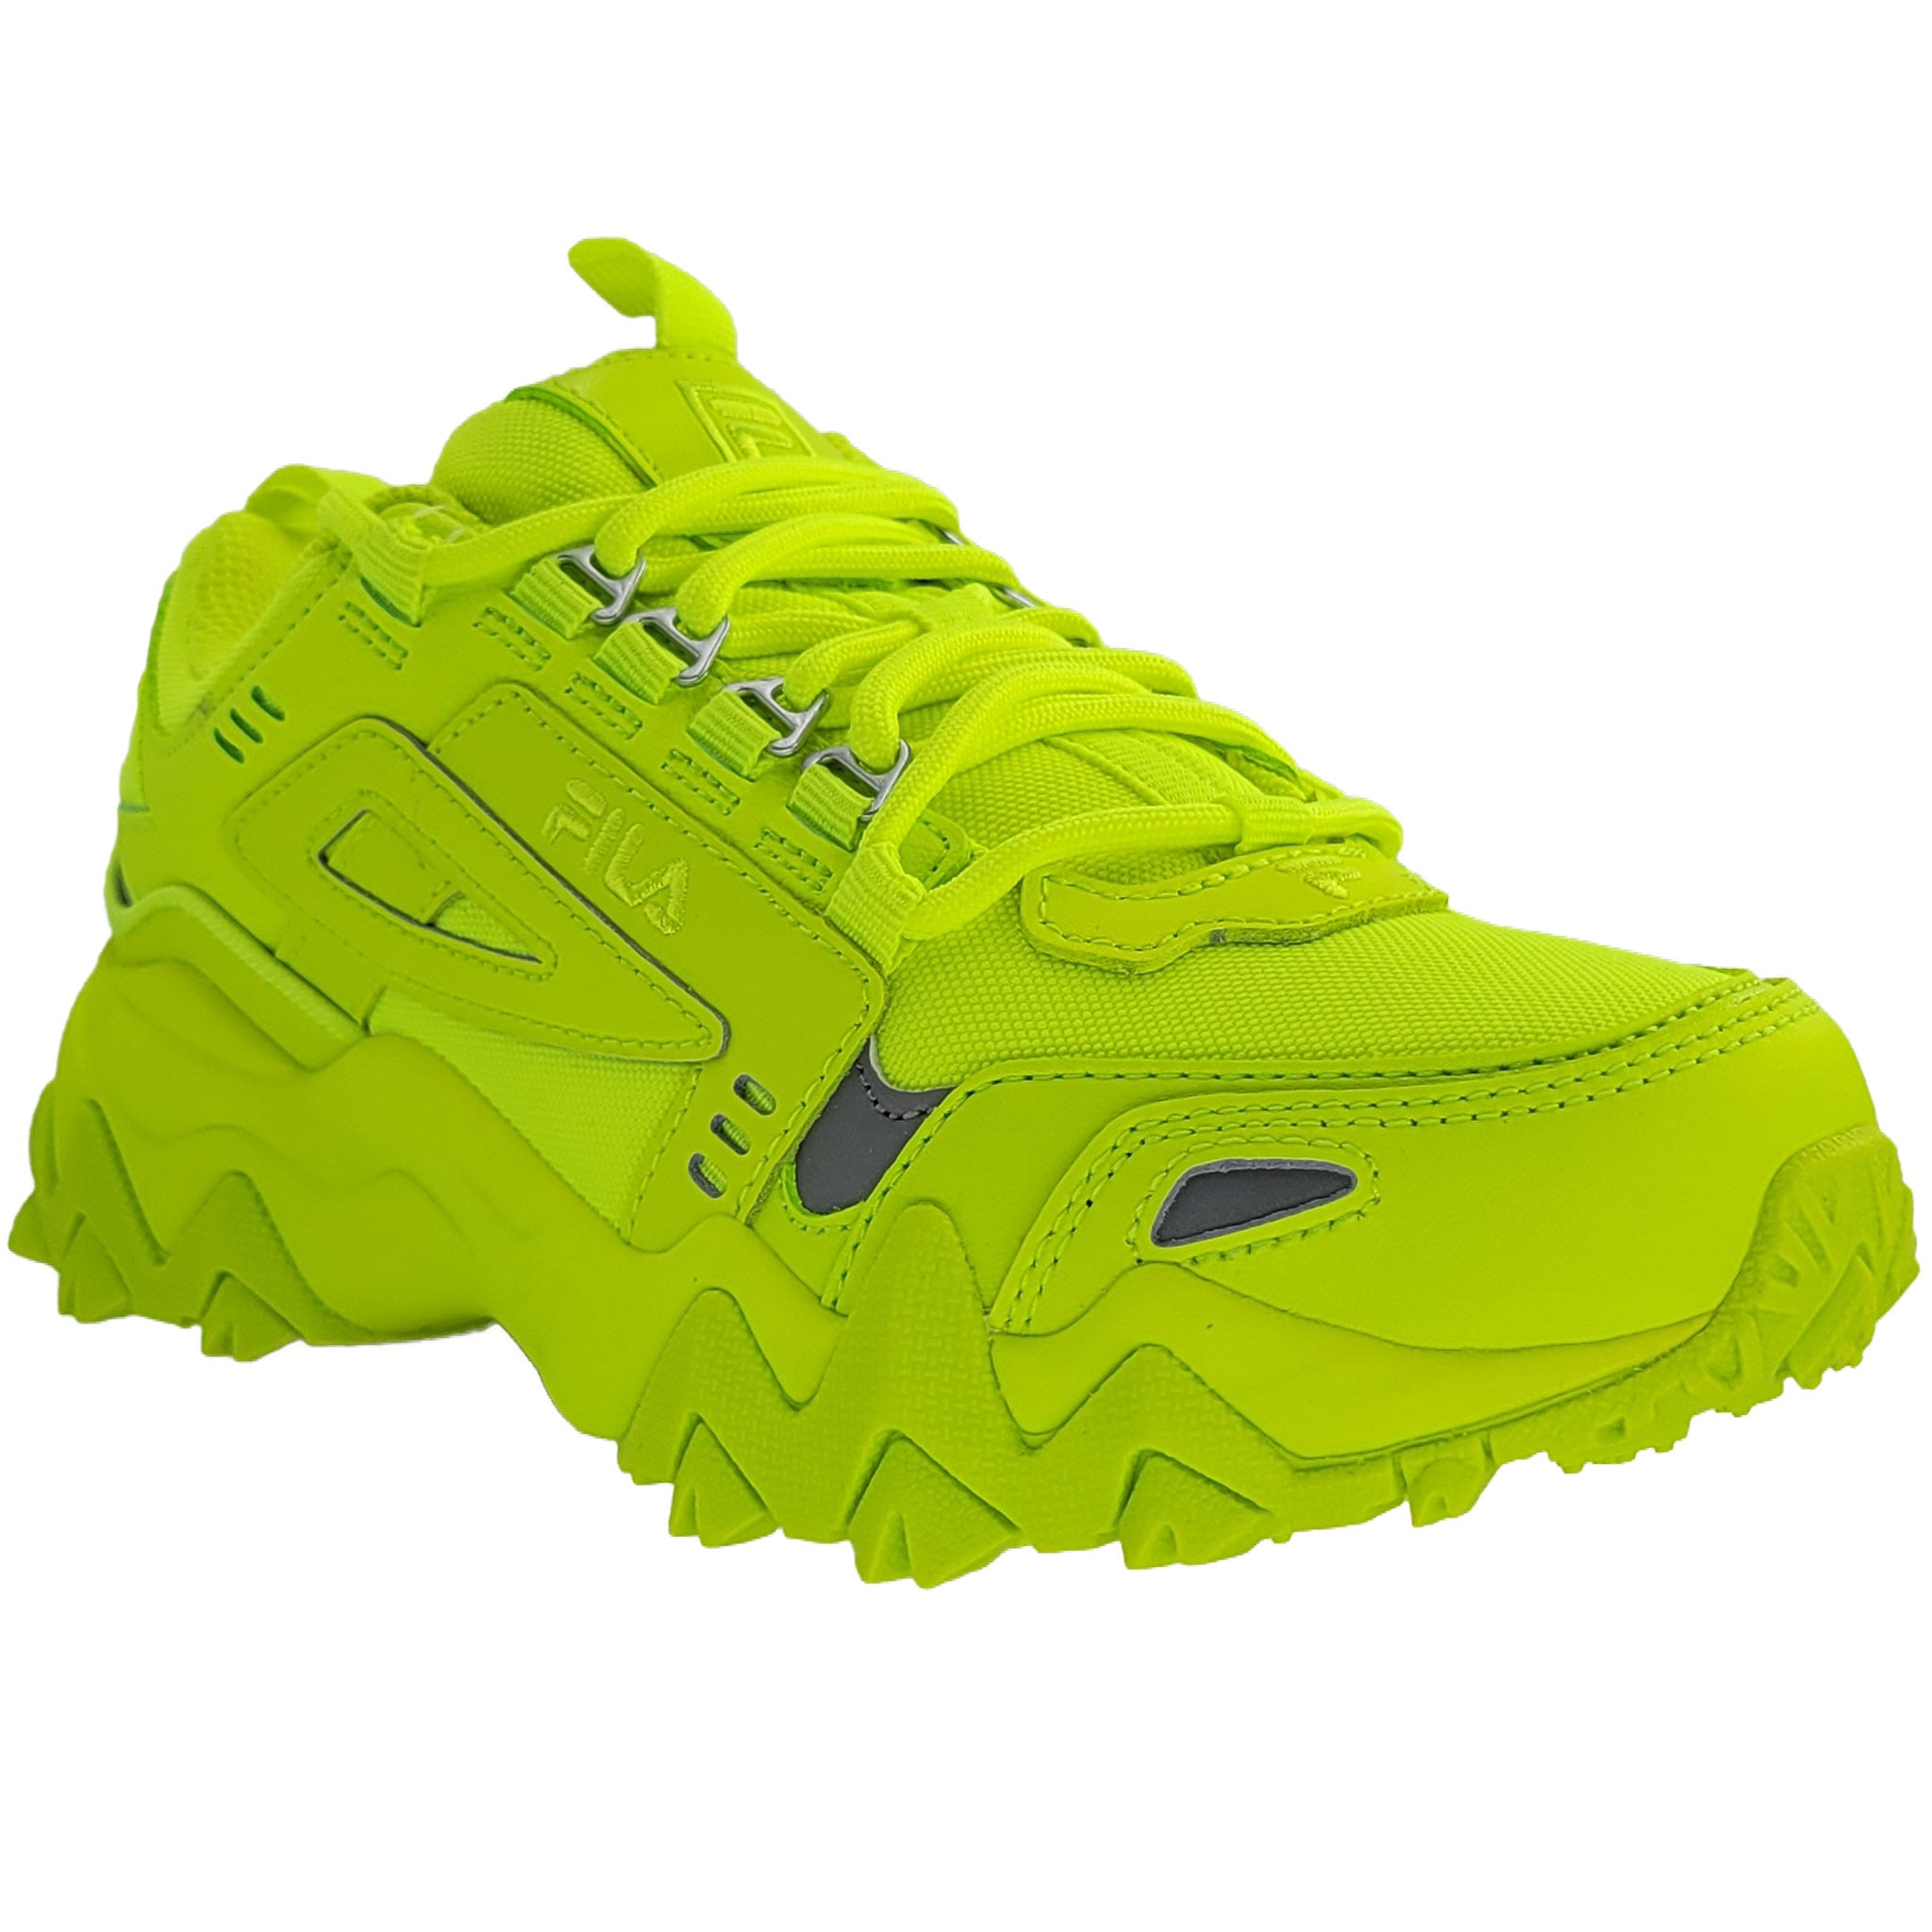 Fila Women's Oakmont Trail Running Shoes Safety Yellow – That Shoe Store and More